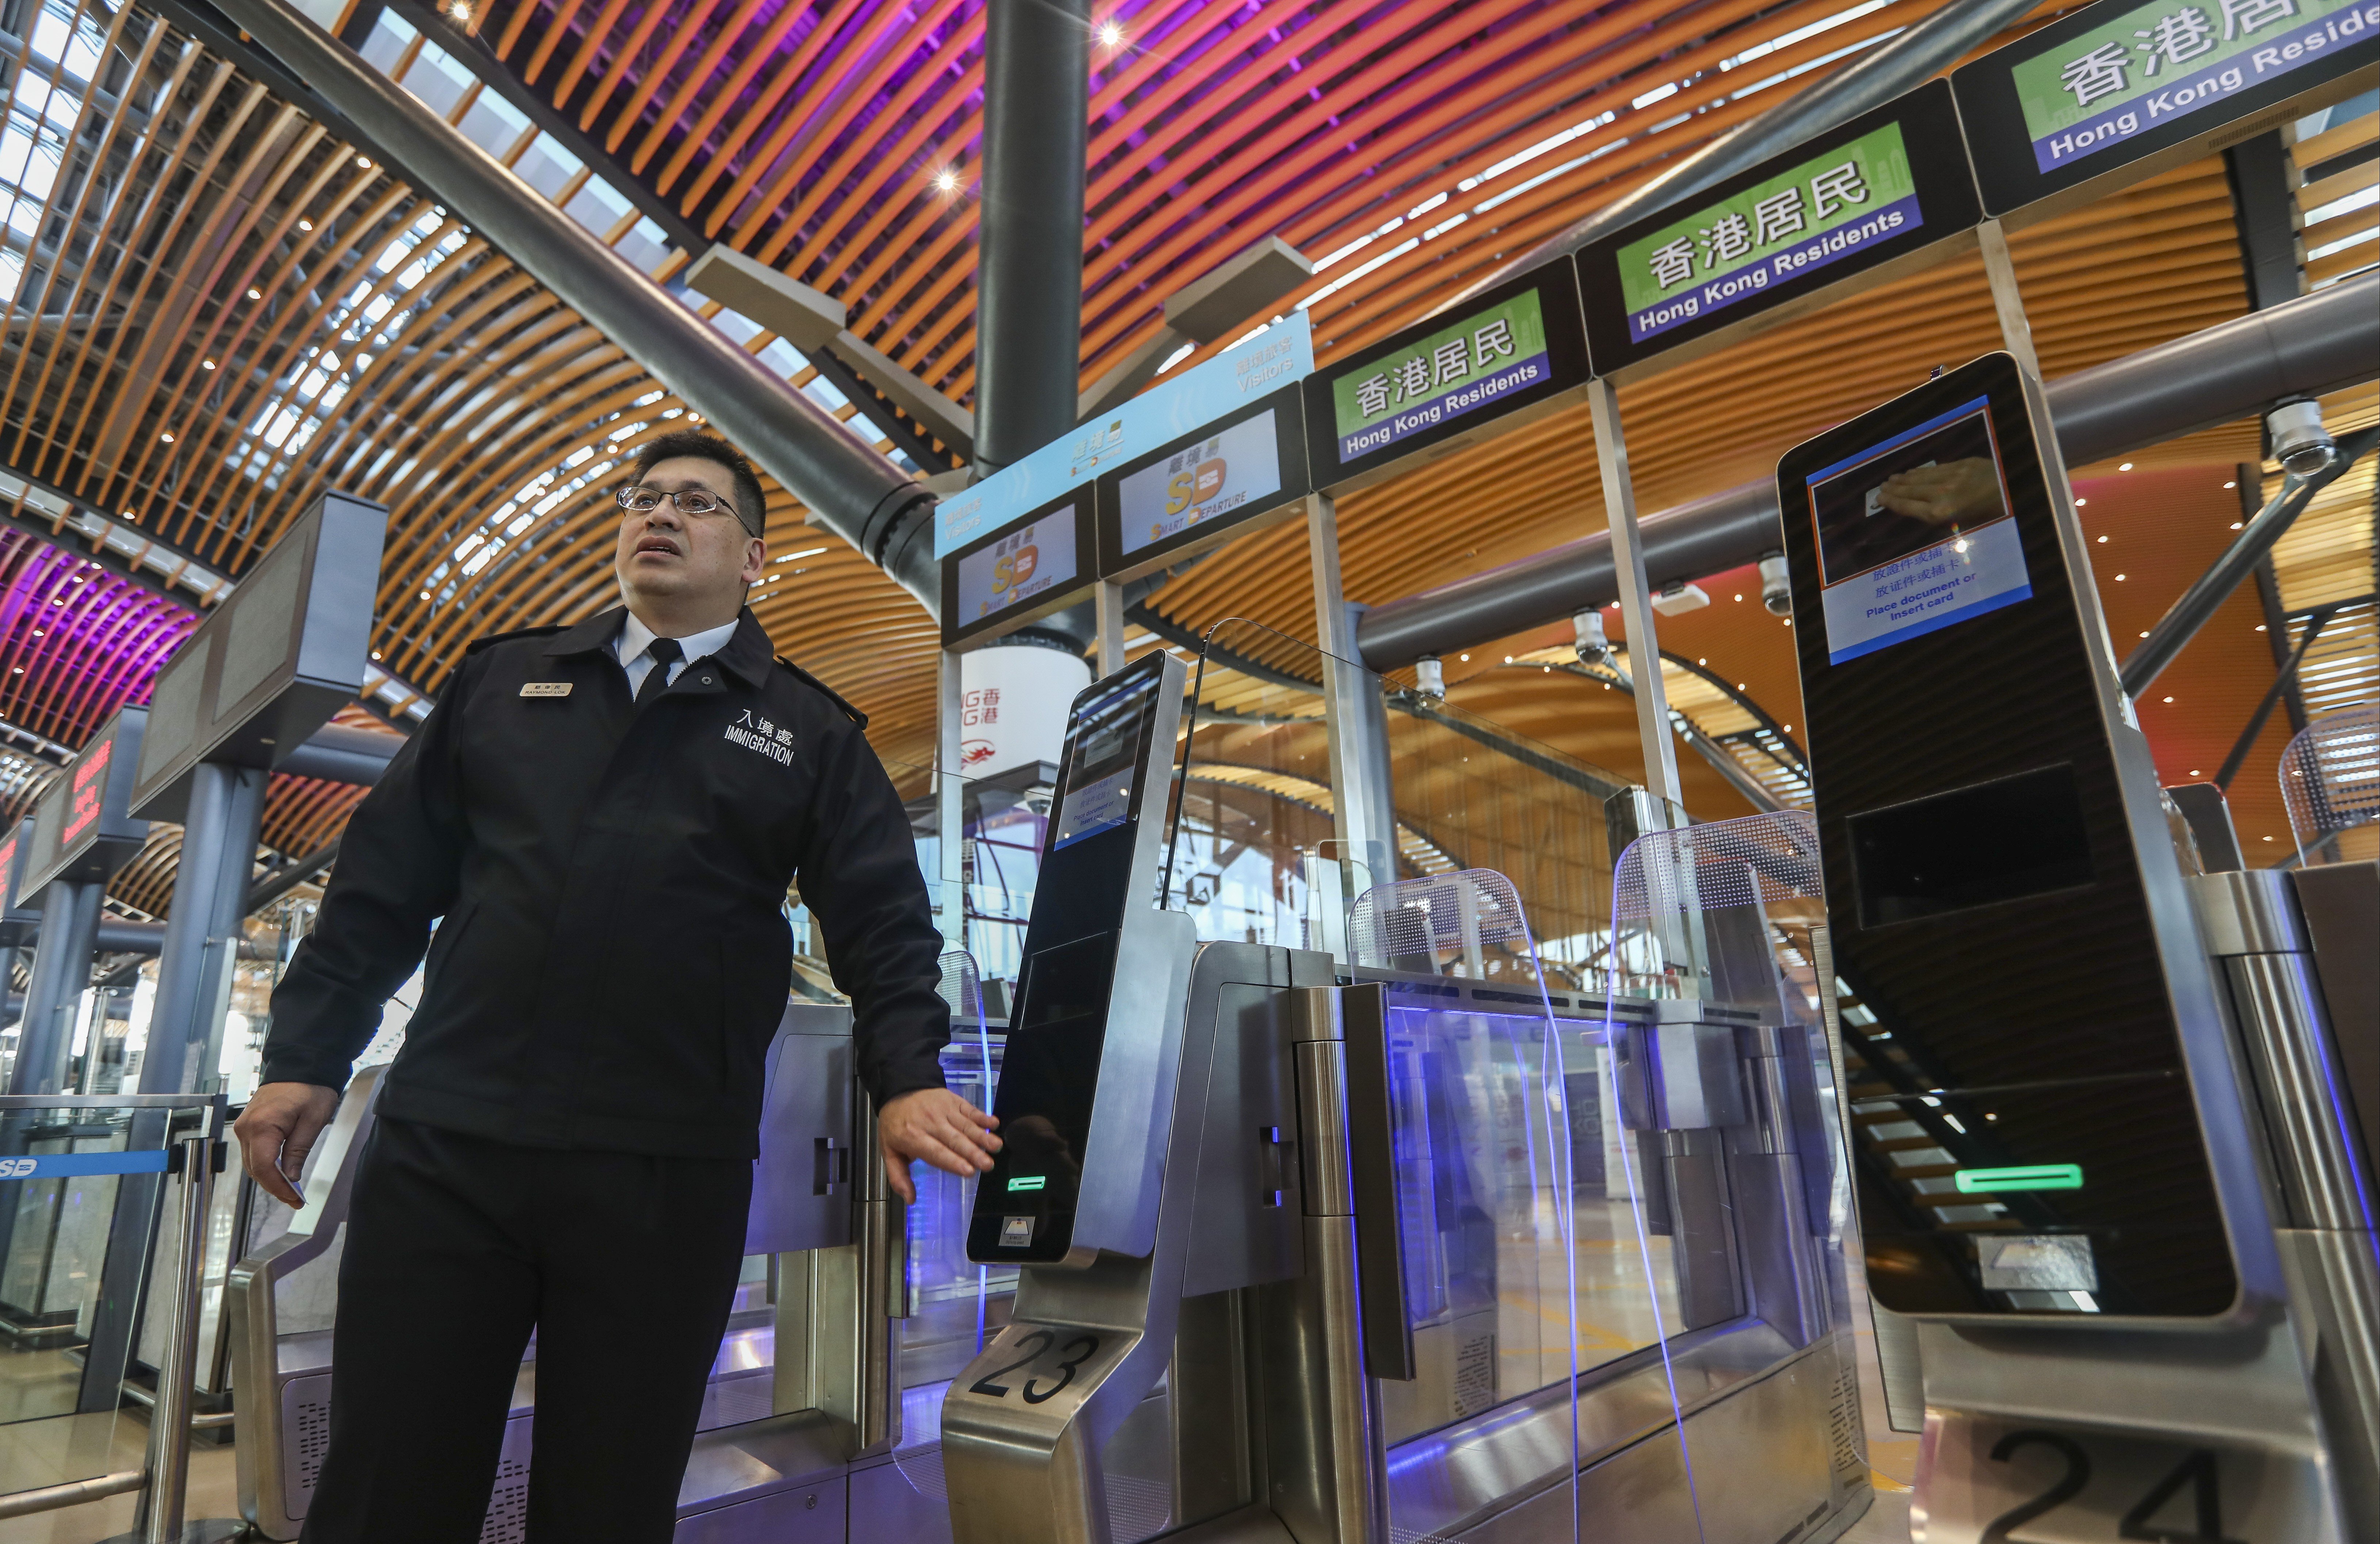 Raymond Lok, assistant director of information systems at Hong Kong Immigration demonstrates how to use the new e-channel at the customs checkpoint of the Hong Kong-Macau-Zhuhai Bridge. Photo: Xiaomei Chen